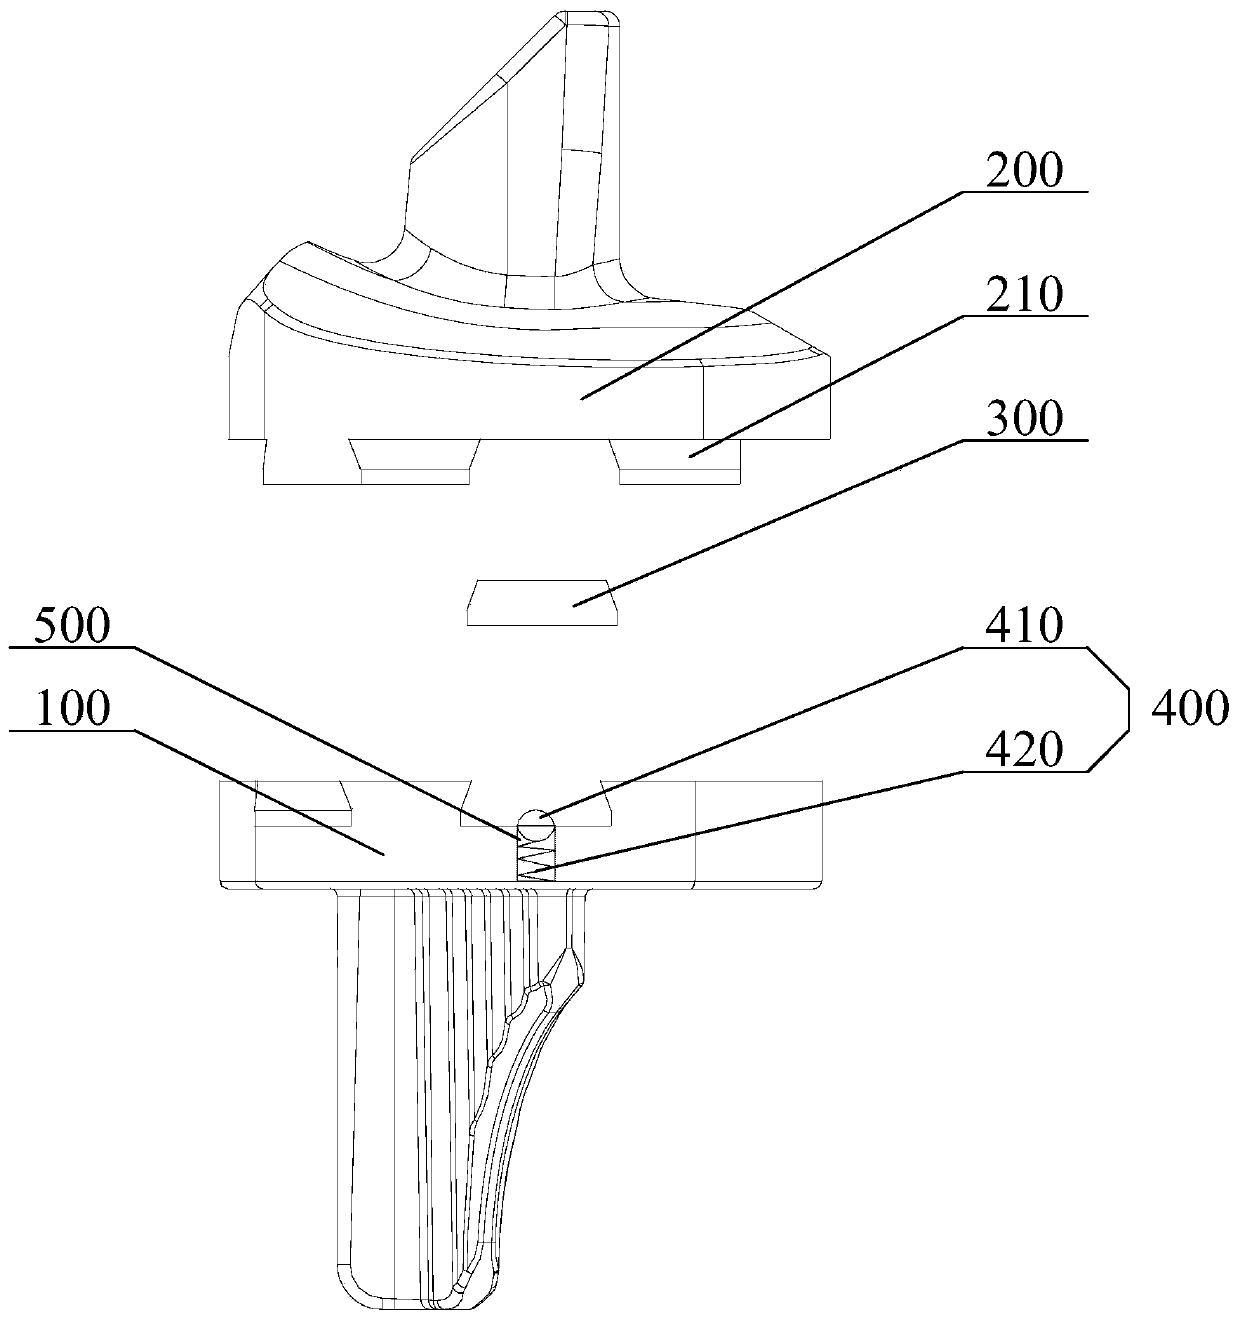 Artificial tibial prosthesis and artificial knee joint